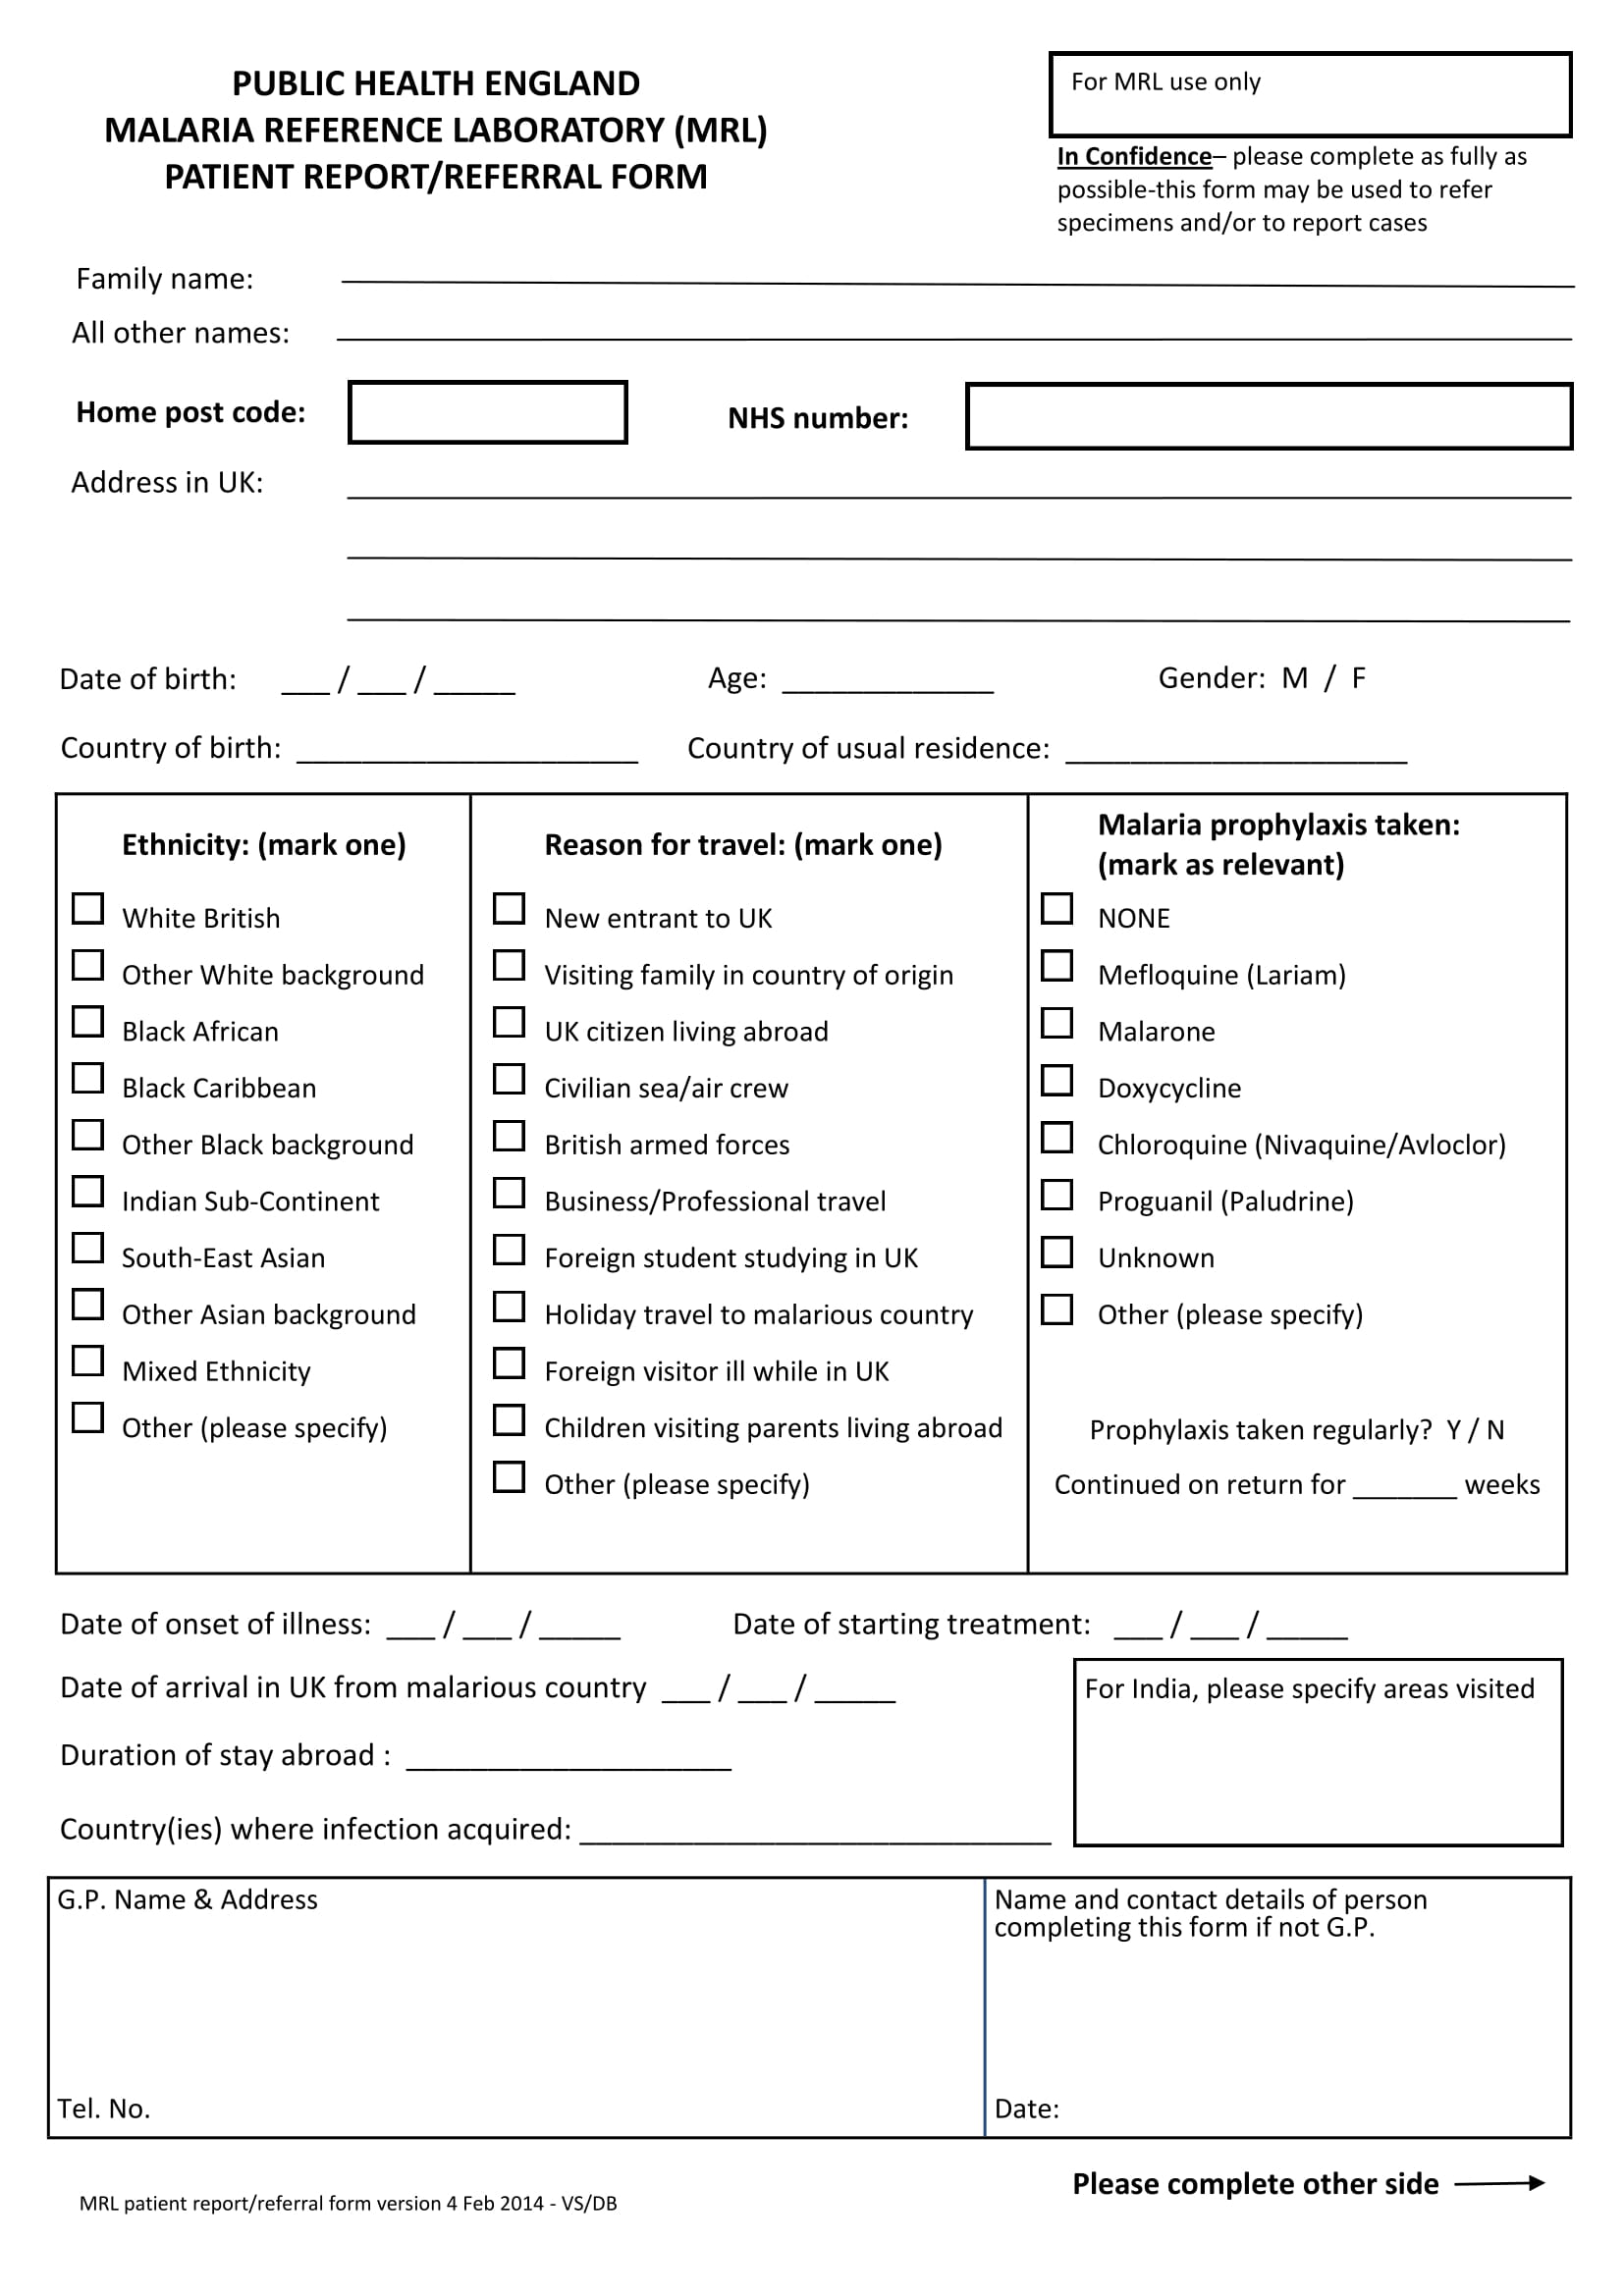 patient report or referral form 1